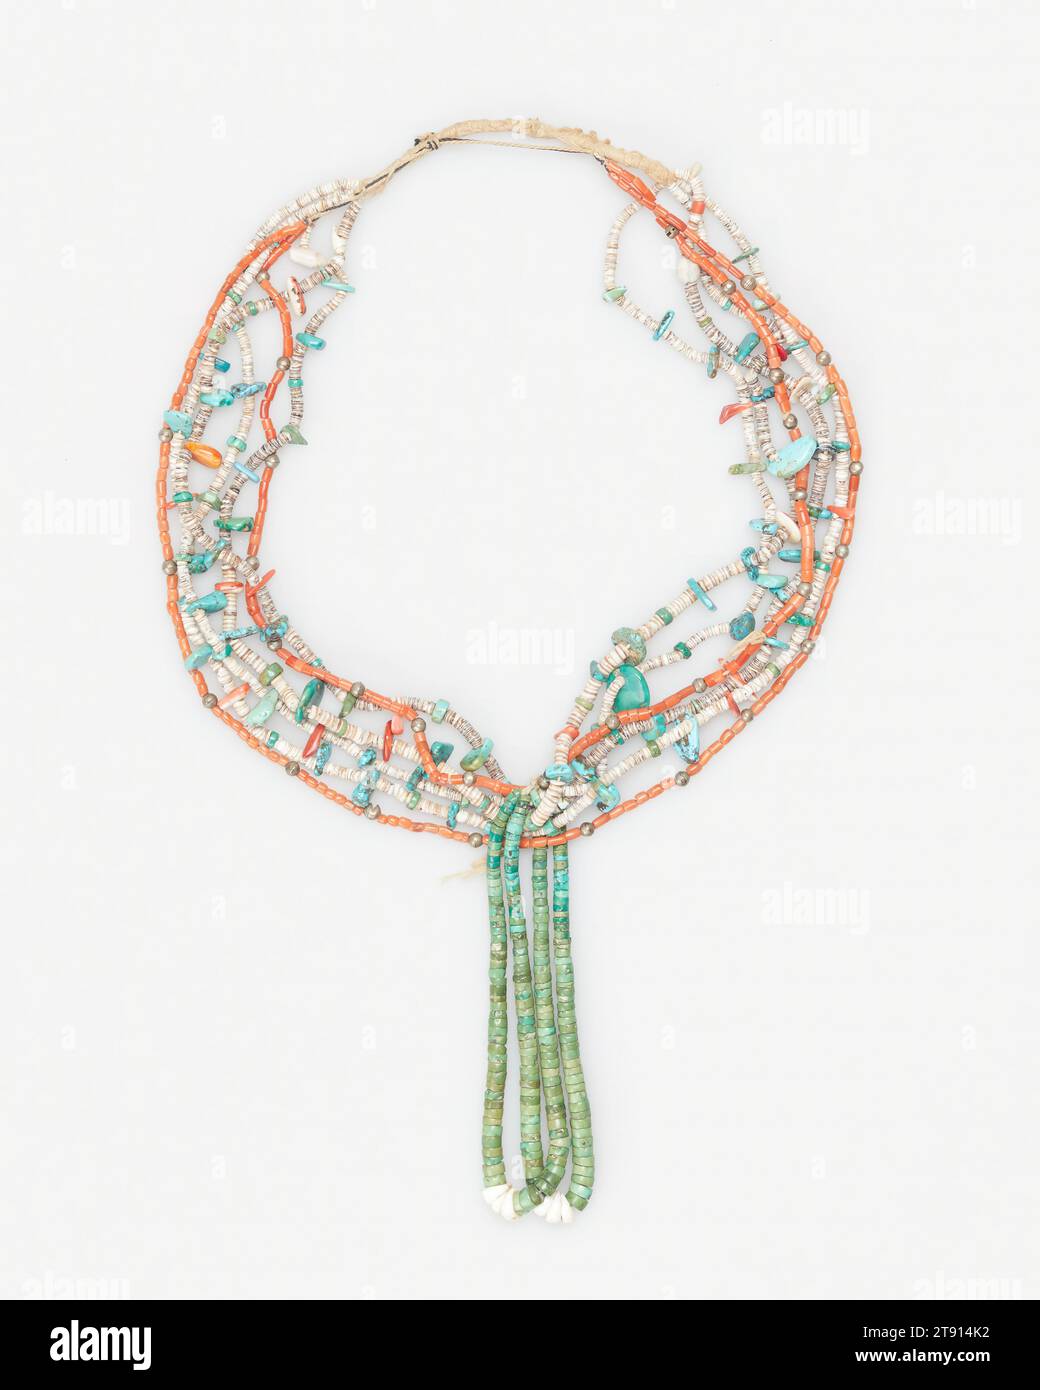 Necklace, 20th century, 13 in. (33 cm), Heishi, turquoise, shell, coral, silver, United States, 20th century Stock Photo